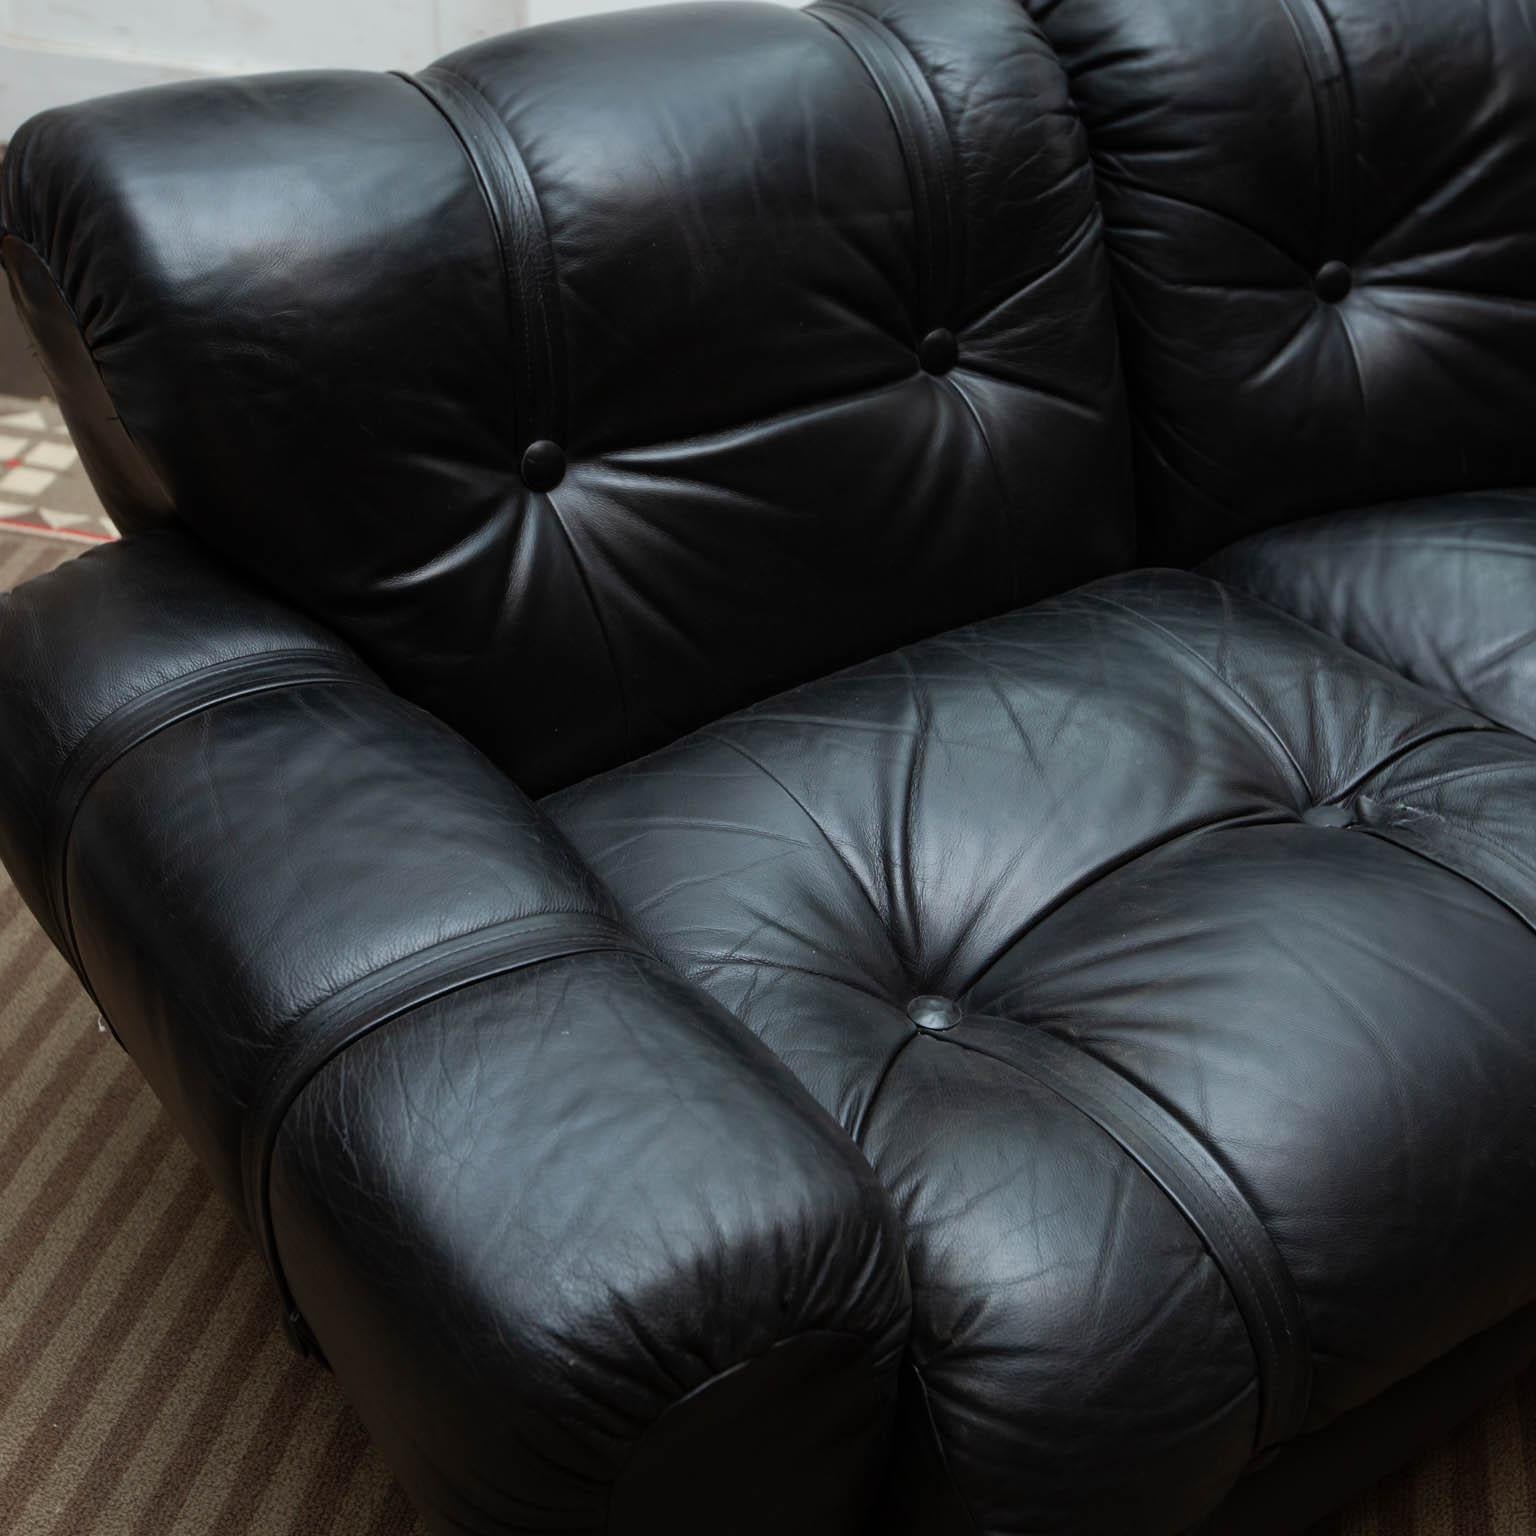 This four-seat leather sectional is a cross between Brazilian modern and B&B Italia via Tobia Scarpa. Most likely from the 1970s. Thick black leather is in great condition. Center section is 65